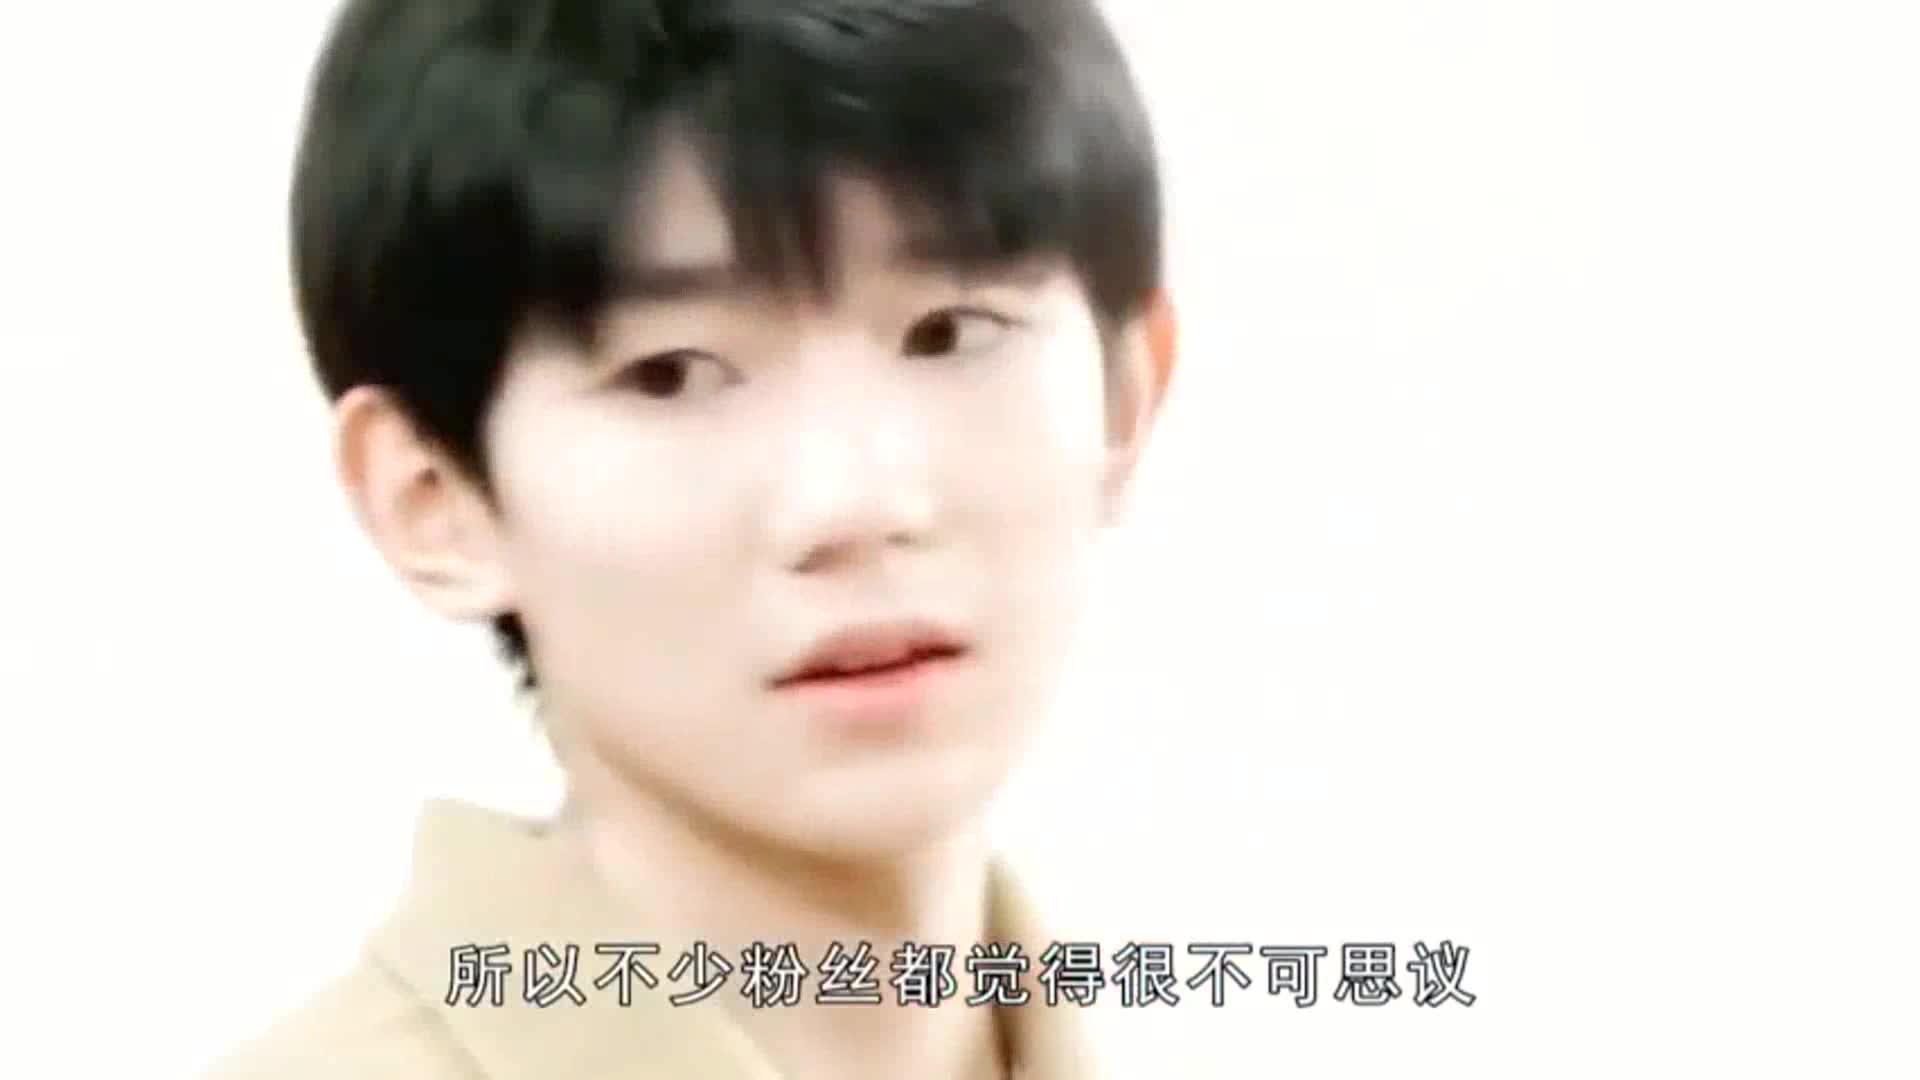 Wang Yuan once again announced good news to the government. After seeing his "new identity", netizens: Do Zhang Yishan agree?